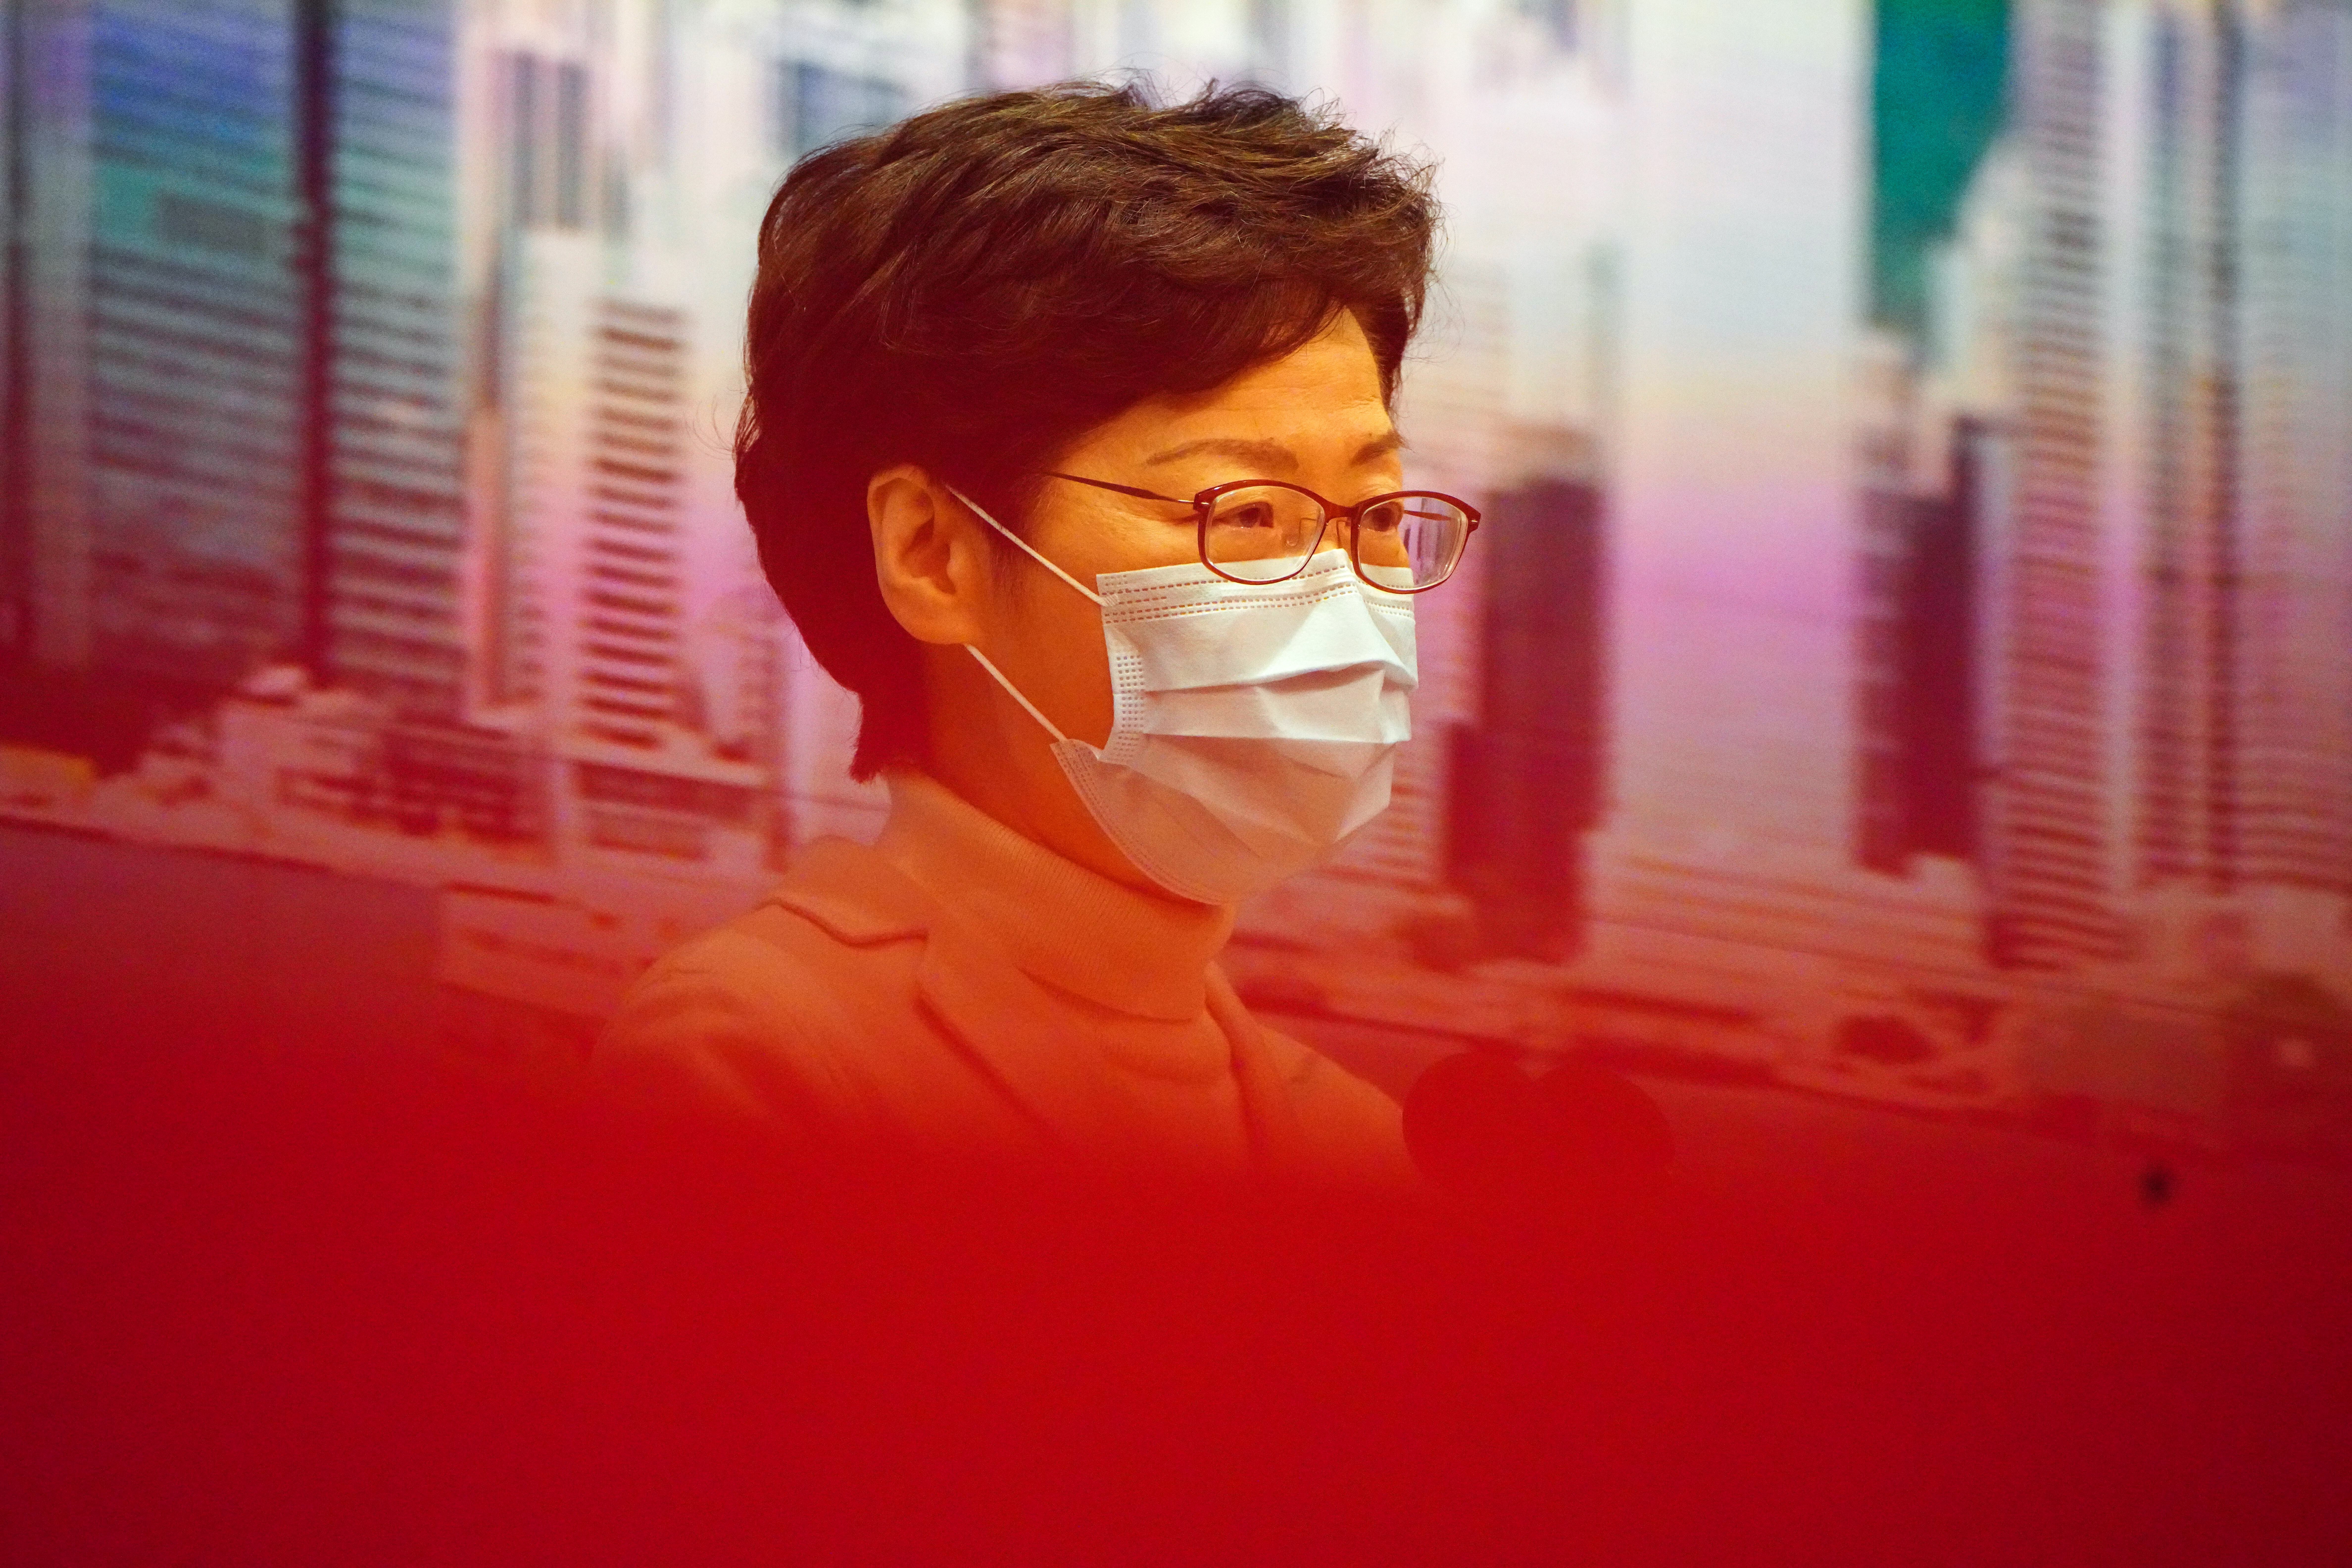 Chief Executive Carrie Lam’s annual salary is set to jump to US$672,000. Photo: Robert Ng